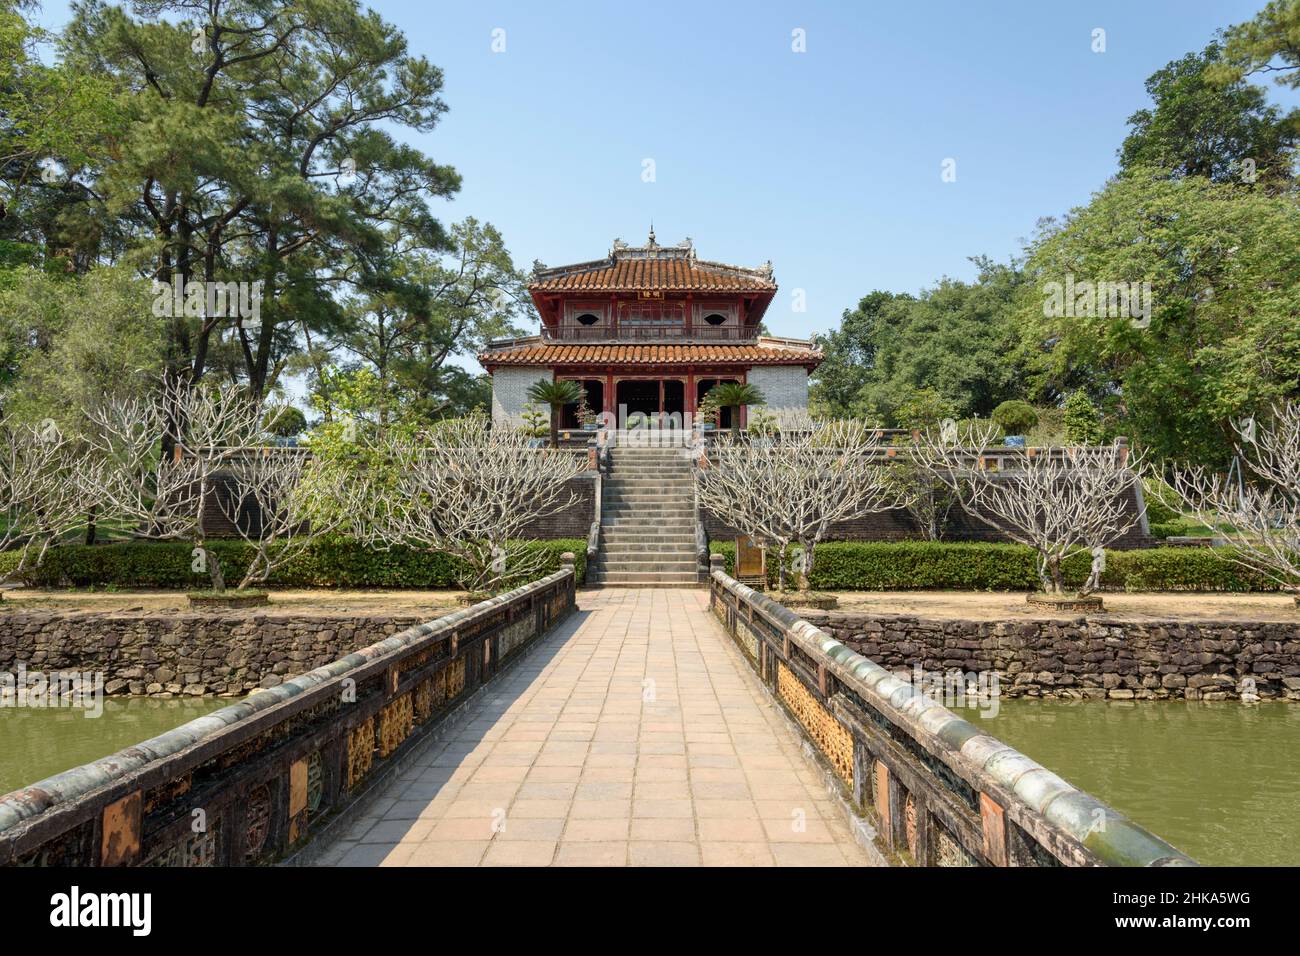 Minh Mang Imperial Tomb Complex on the Perfume River, Hue, Thua Thien Hue province, central Vietnam, Southeast Asia Stock Photo